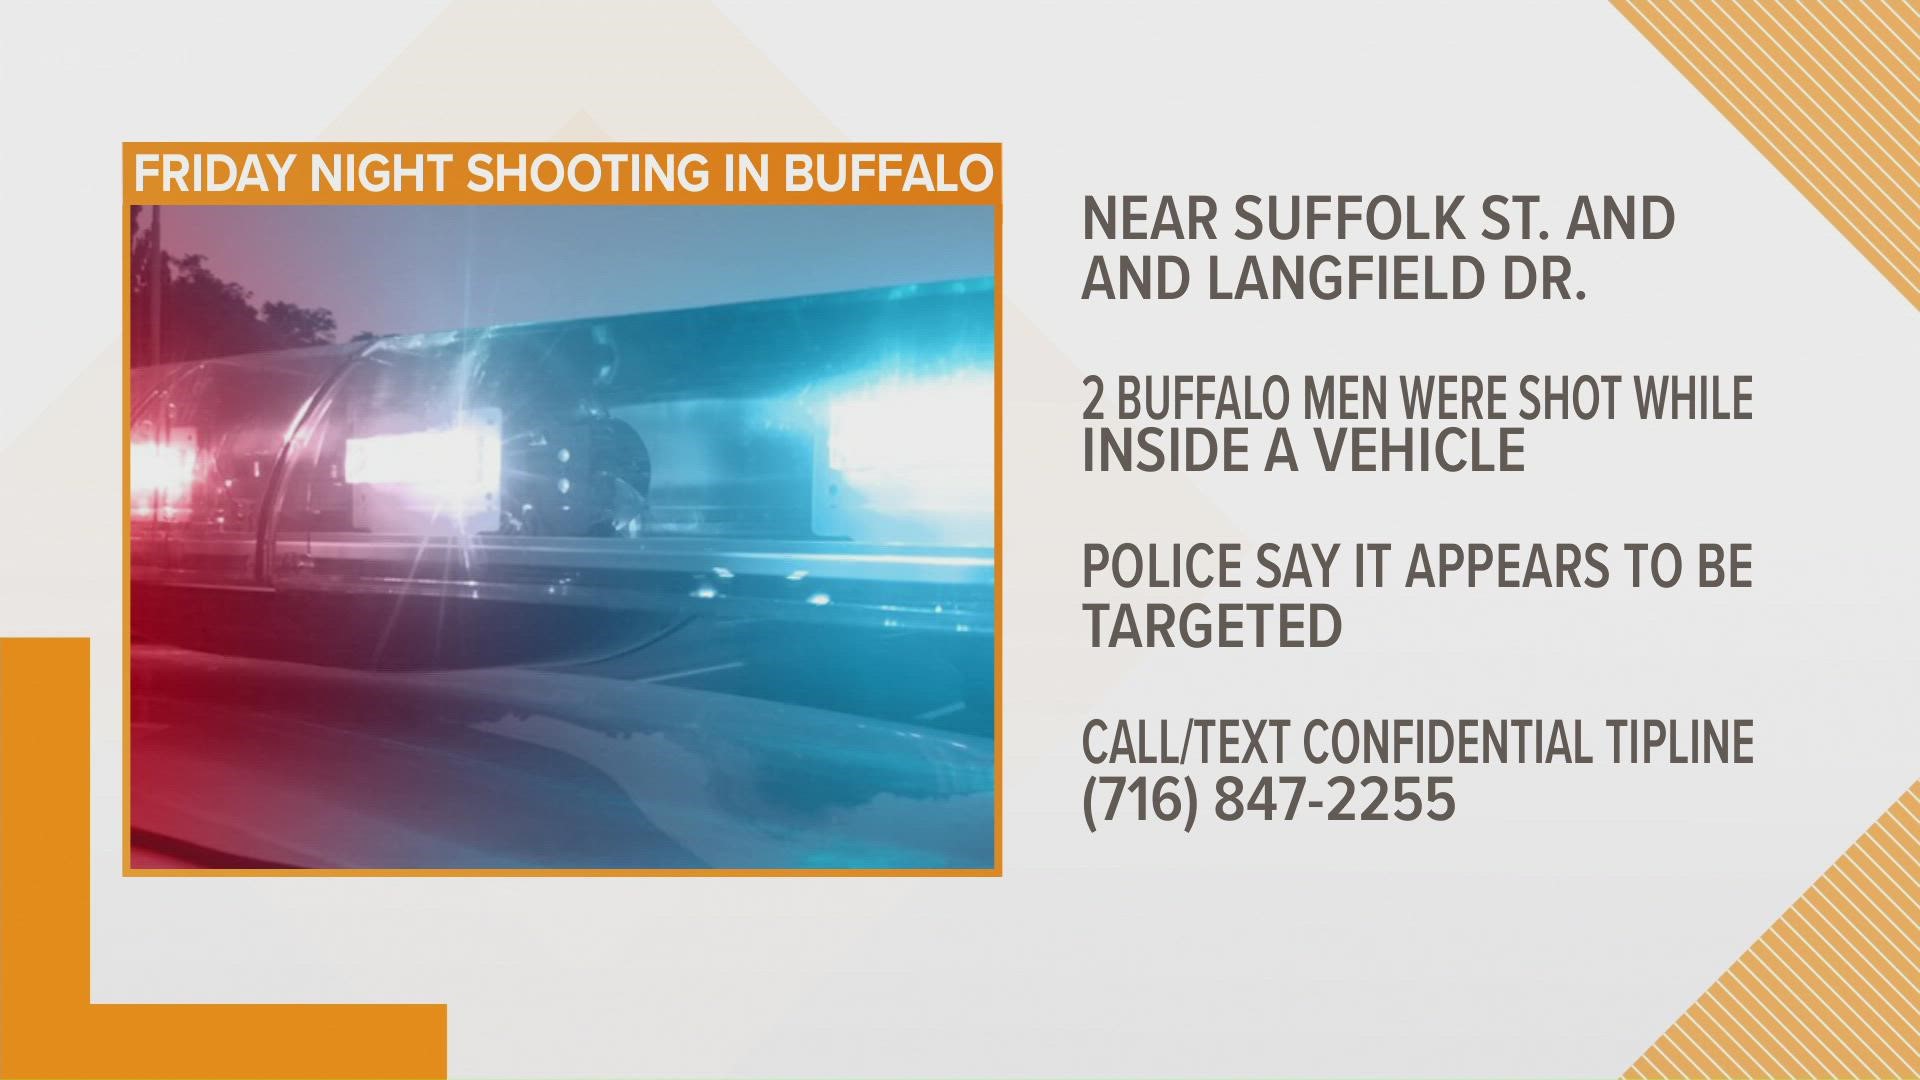 The Buffalo Police Department said two men are recovering after being shot Friday night.